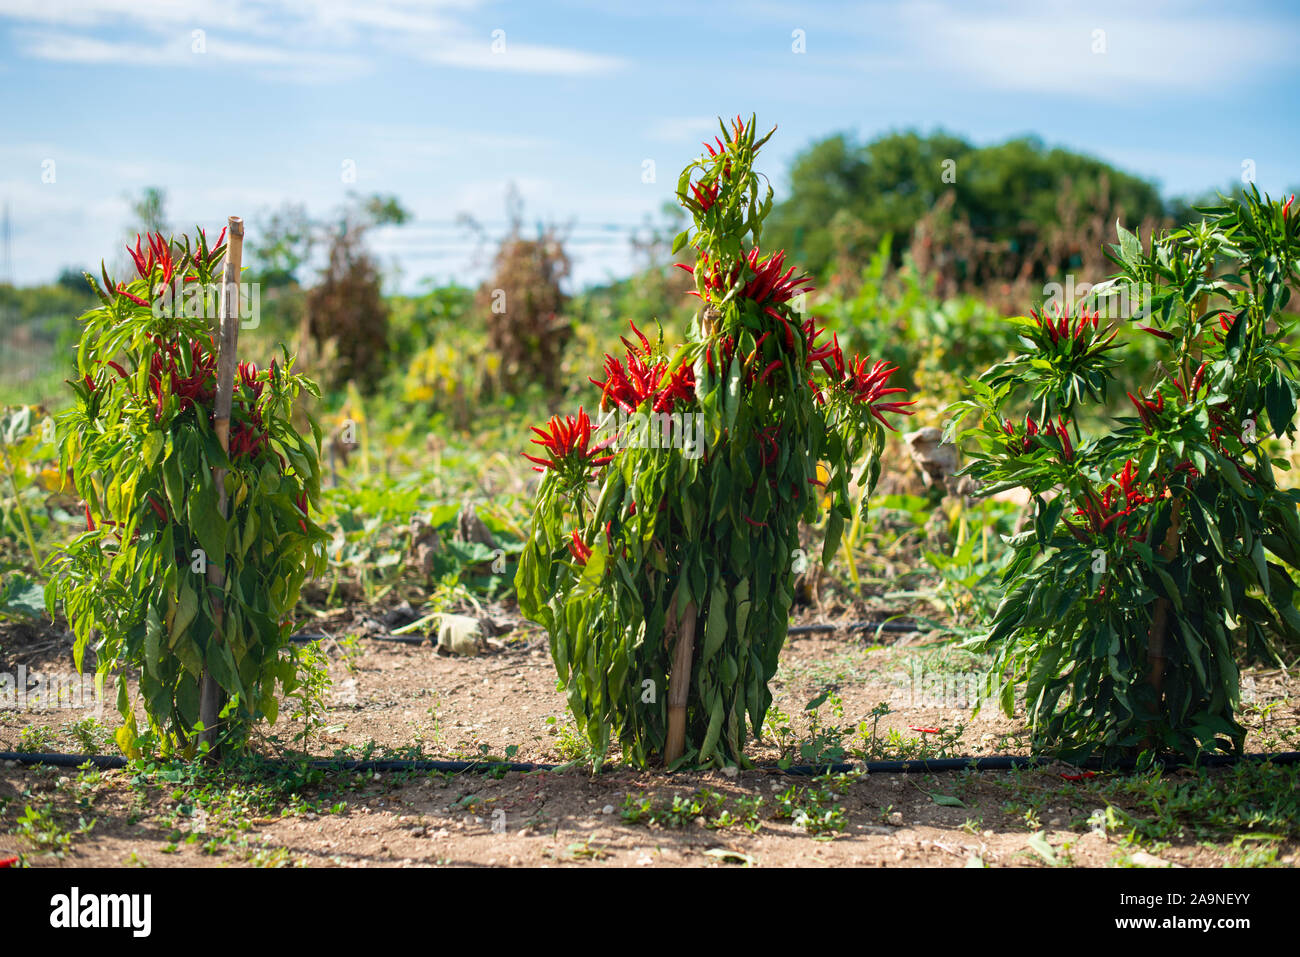 Small red hot peppers in bush. Sunlight. Small garden with hot peppers. Many ripe red hot variety peppers. Agriculture concept. Spicy and hot concept. Stock Photo